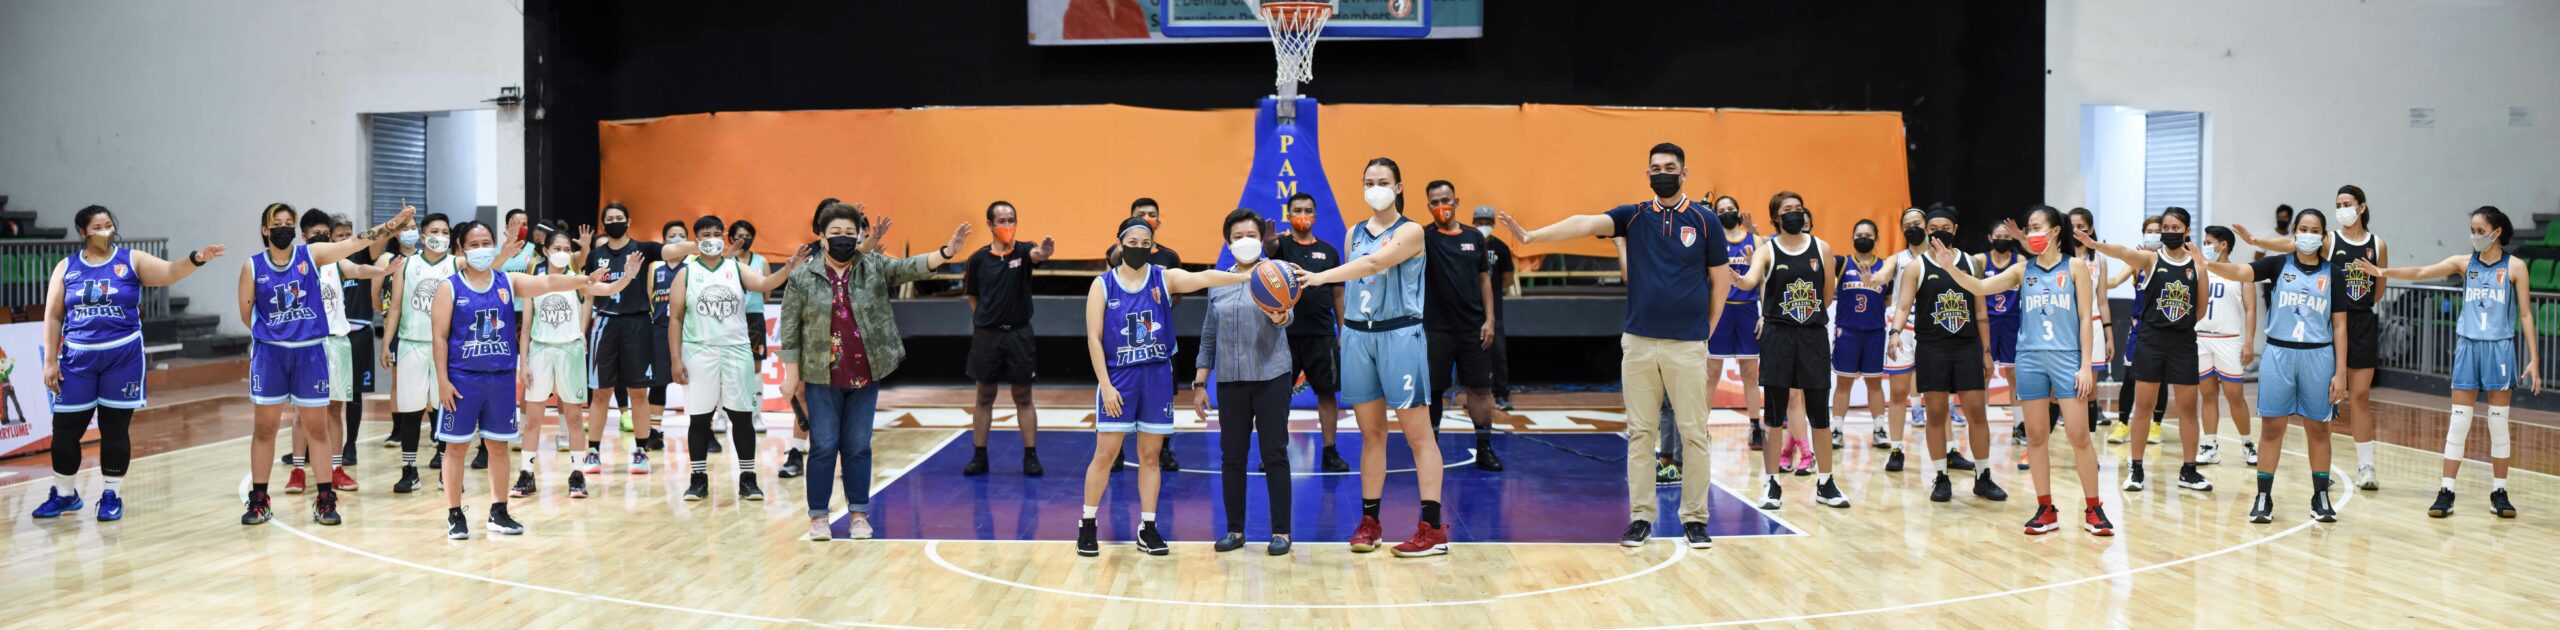 2021-WNBL-3x3-opening-scaled Uratex teams dominate day 1 of WNBL 3x3 leg 1 3x3 Basketball NBL News  - philippine sports news